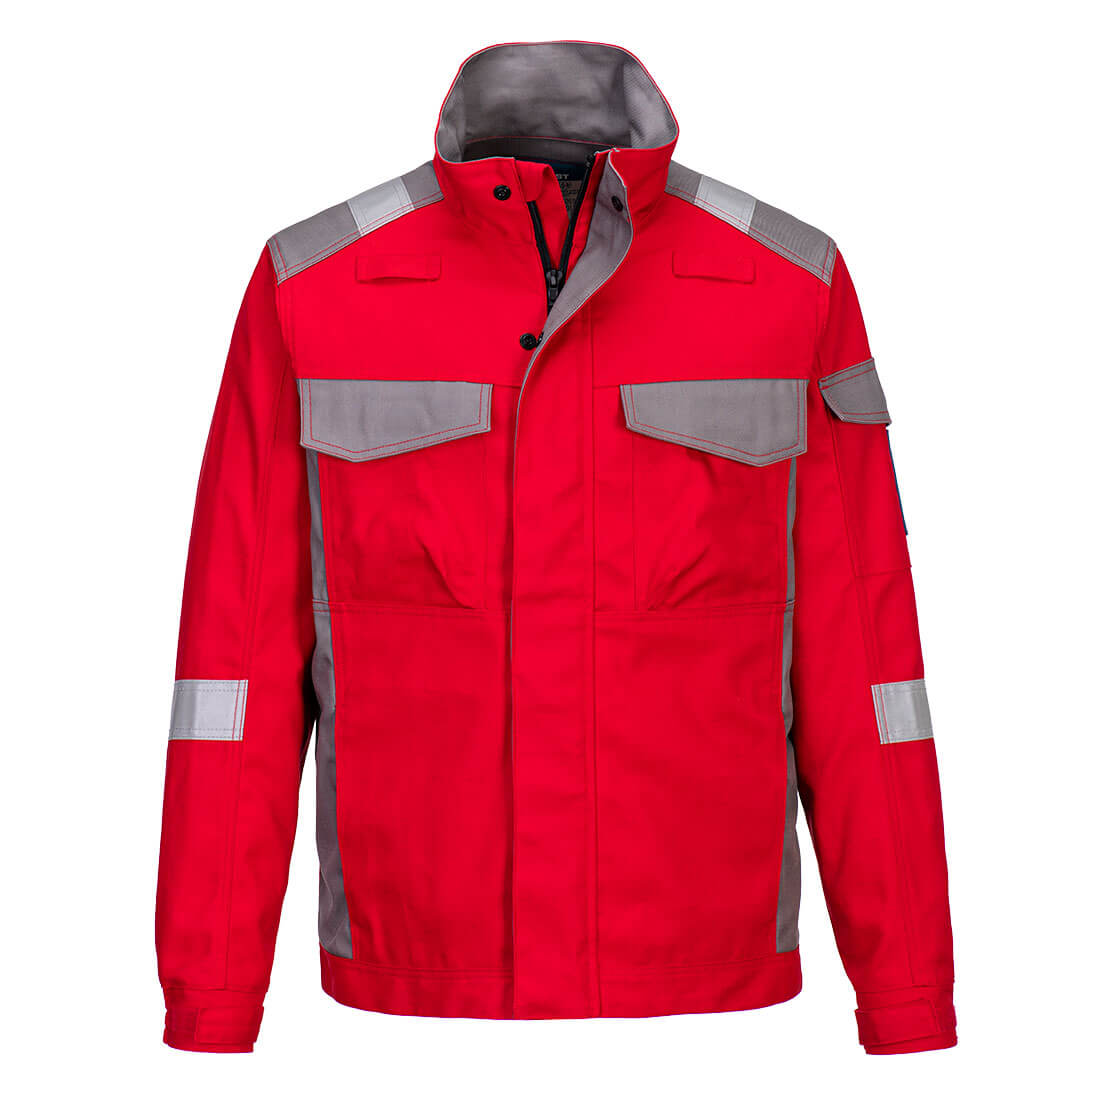 Bizflame Industry Two Tone Jacket  (FR08)